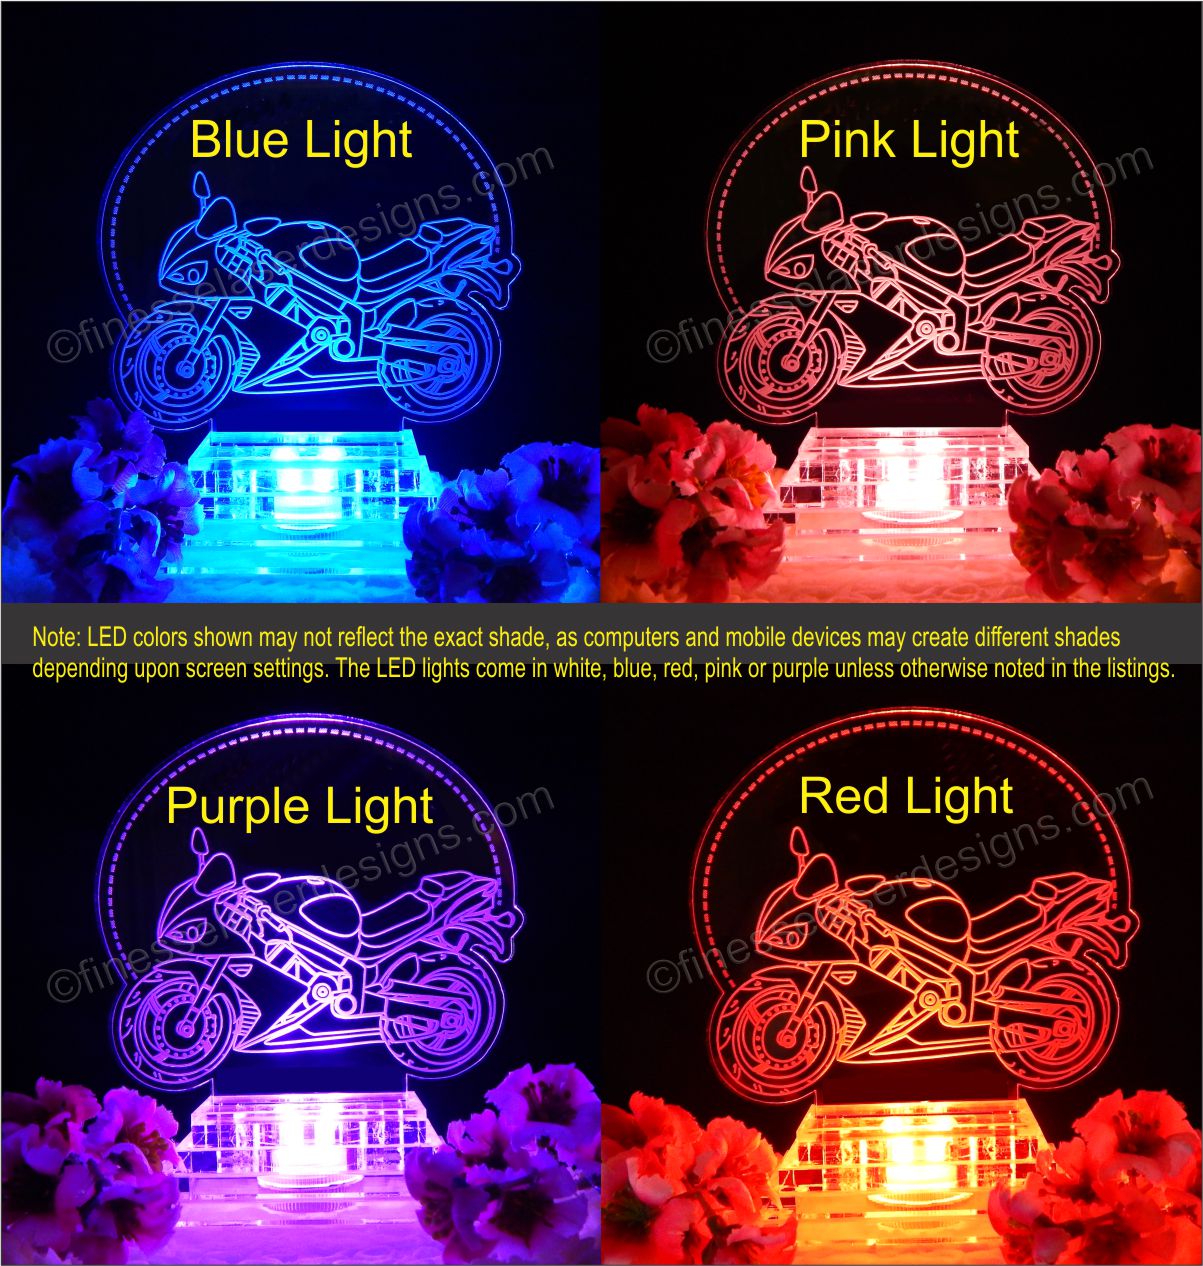 Colored views of acrylic cake topper with a side view of a sport motorcycle showing blue, pink, purple, and red lighted views